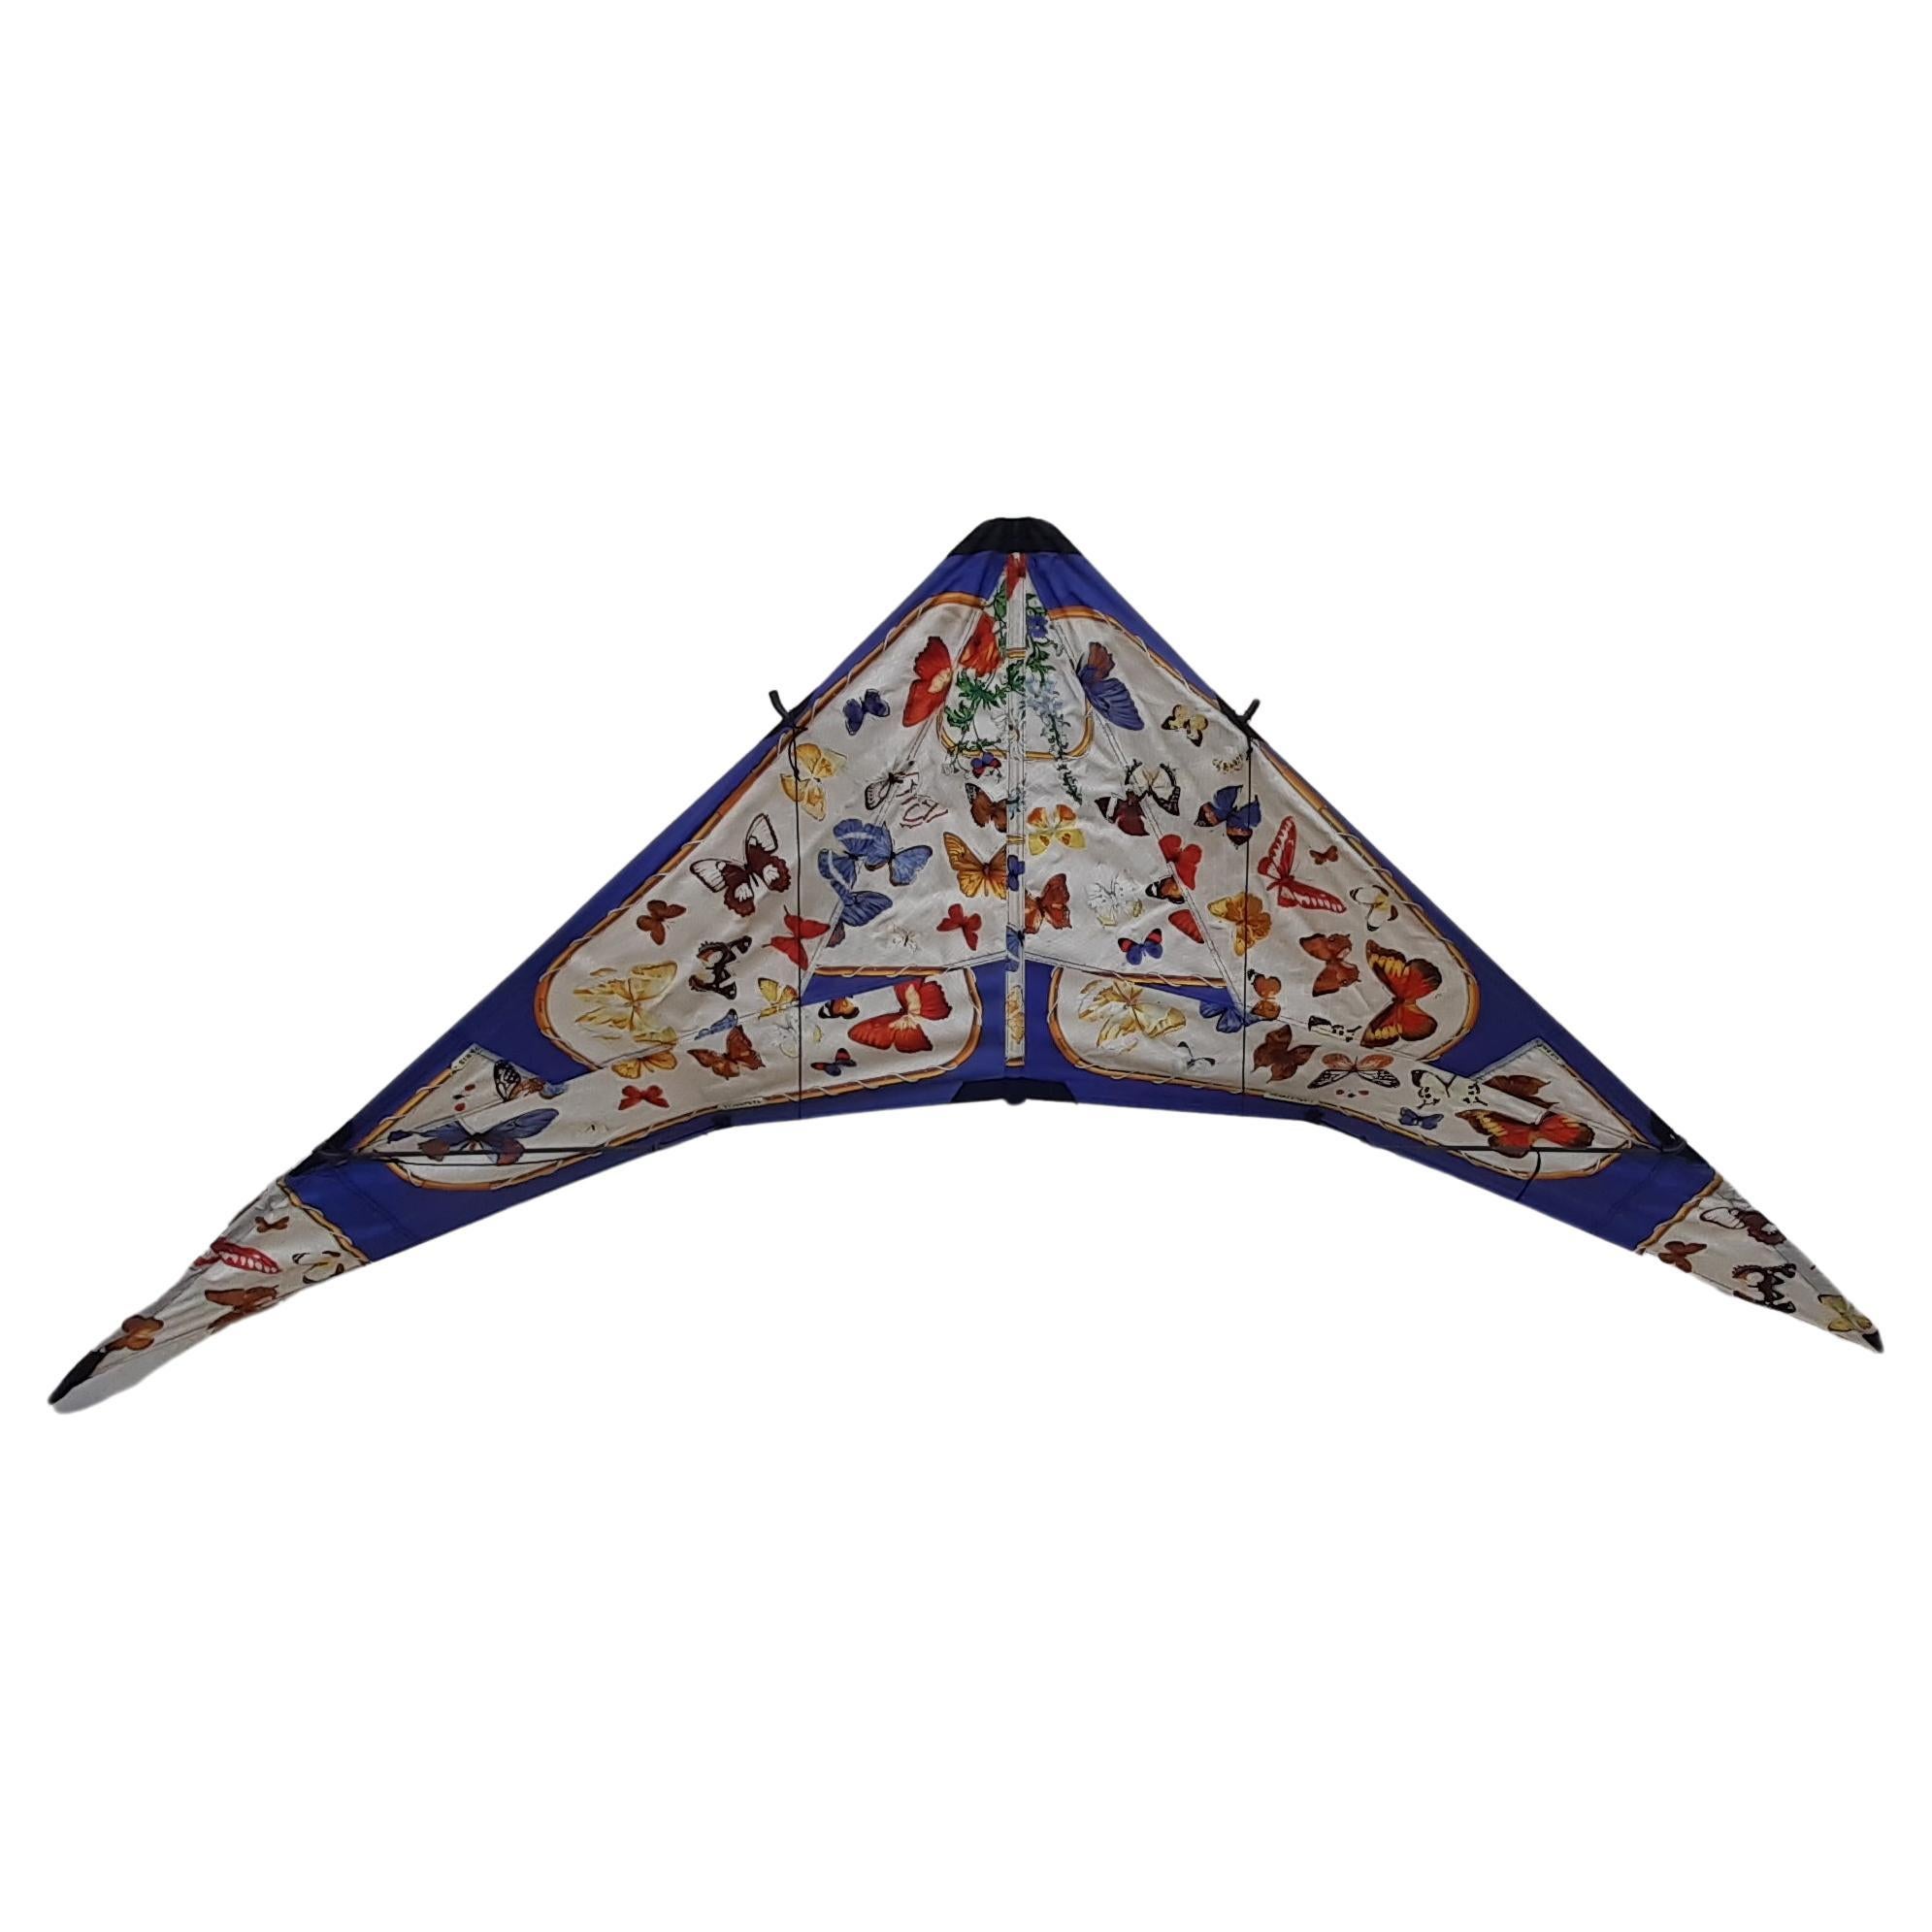 Rare opportunity to get an authentic Hermès Kite

Please note: some parts may be missing. Therefore we do not guarantee that it can fly. Sent as is

Vintage item

Made of water-repellent waterproof canvas, printed with the 